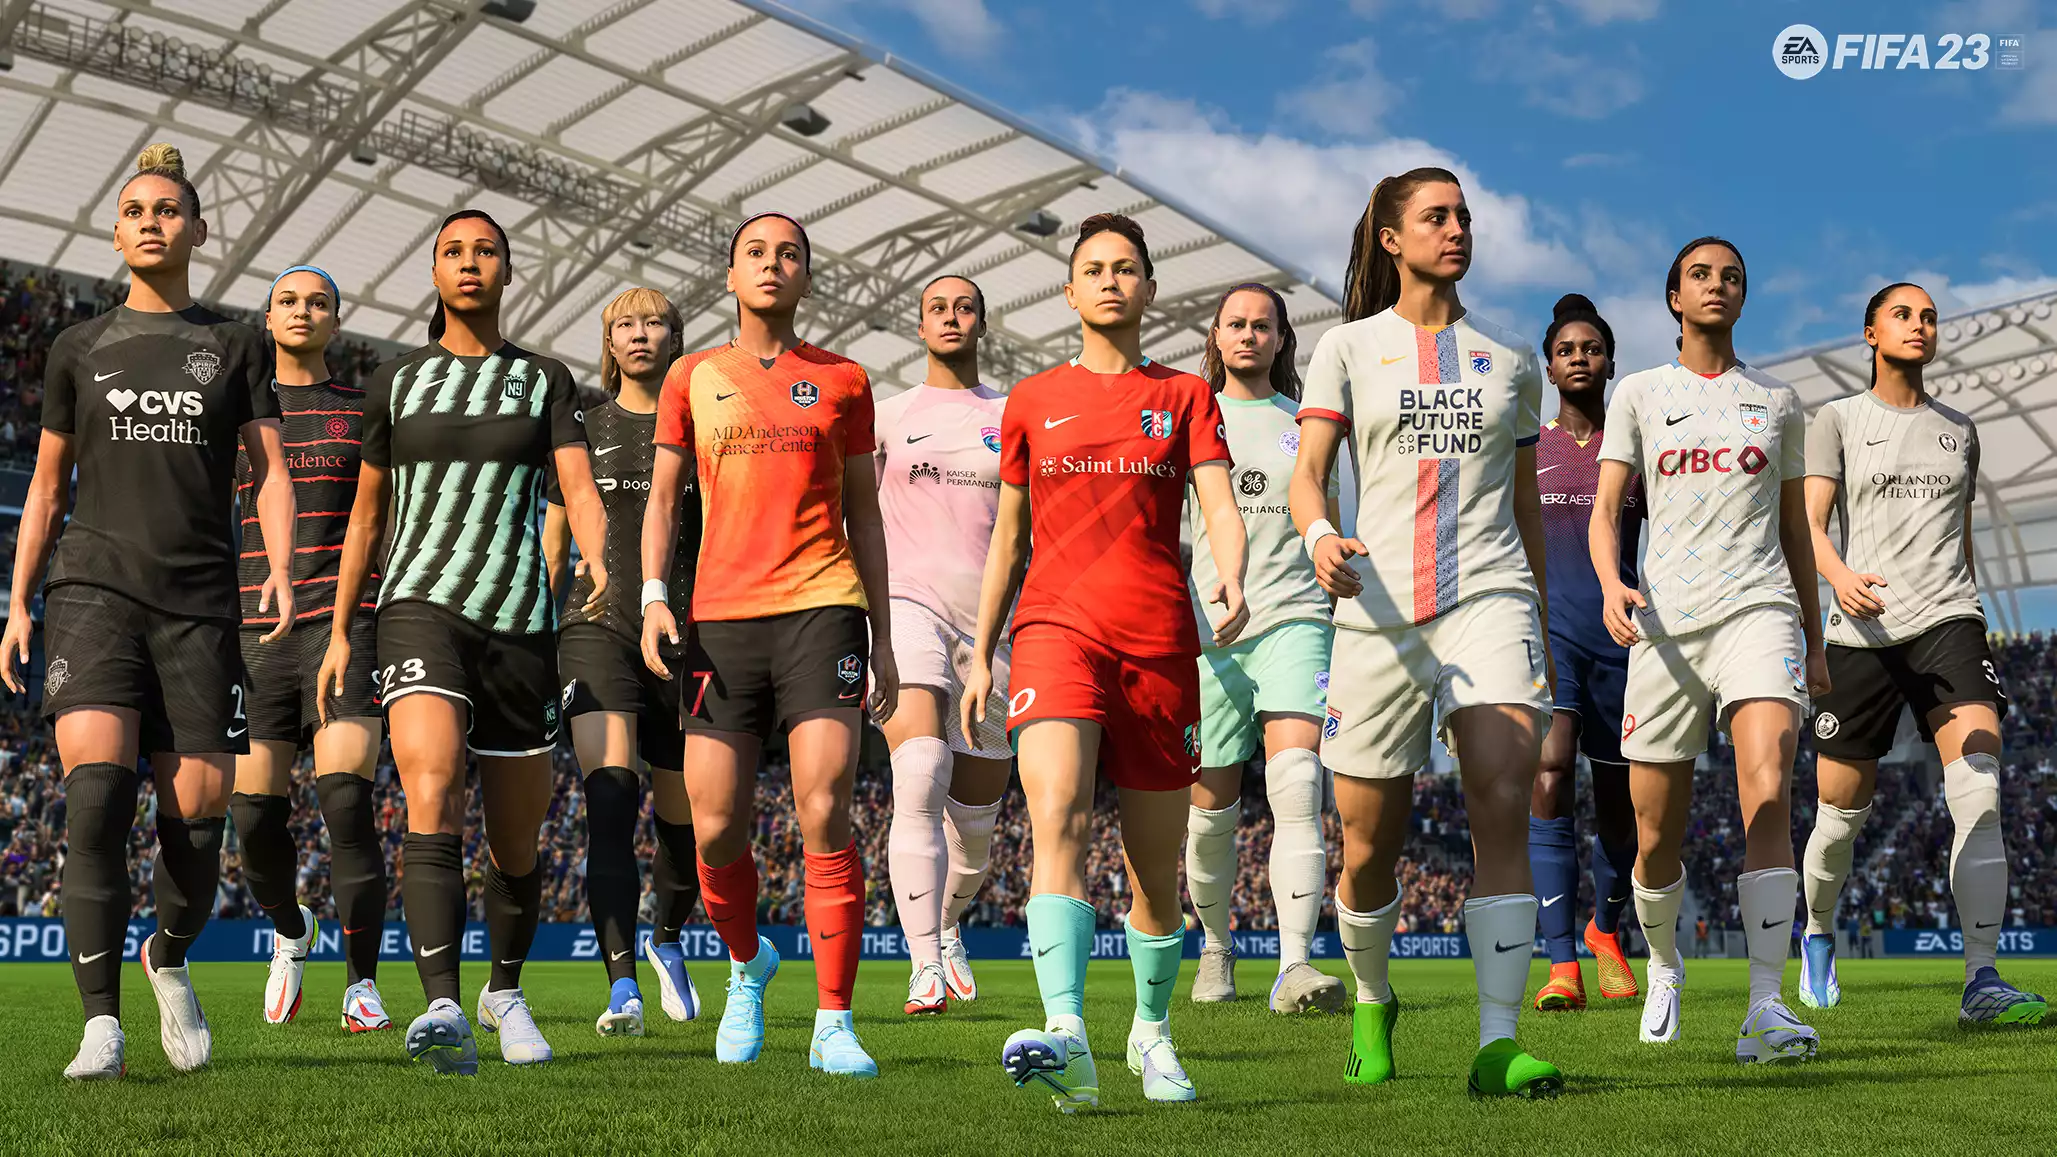 EA Sports adds more women clubs and players to FIFA 23